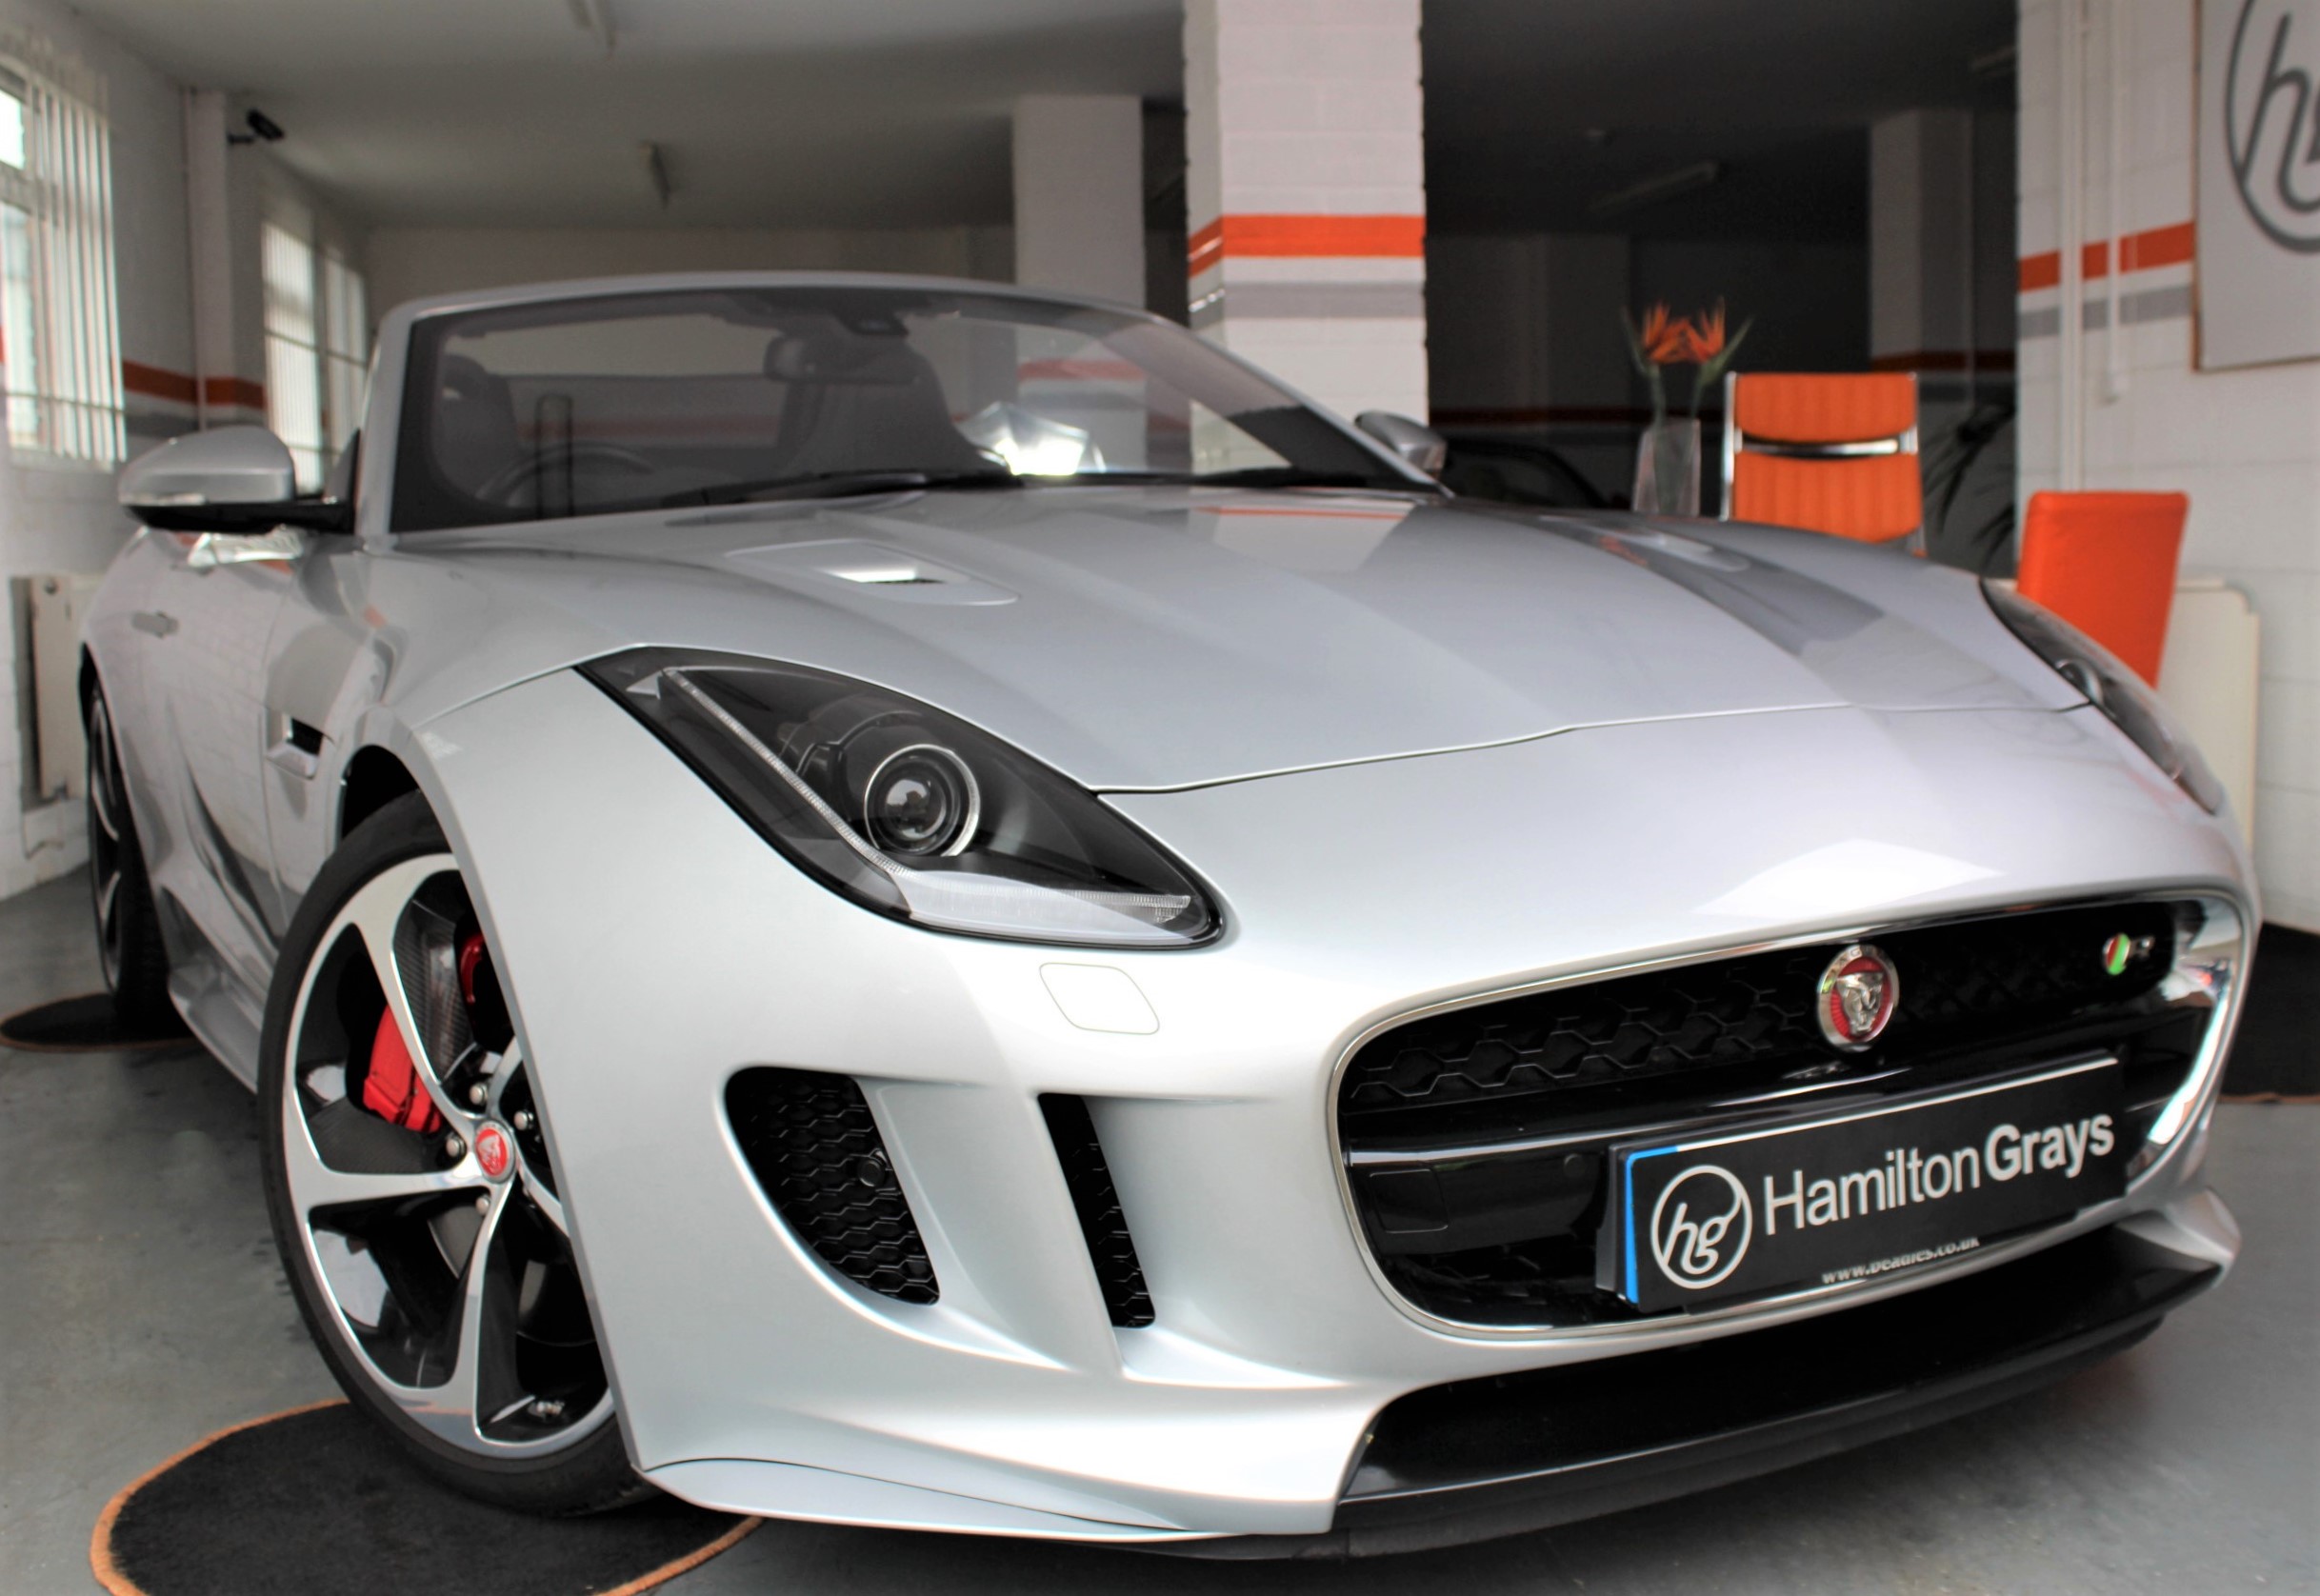 2016 (16) Jaguar F-Type 5.0 V8 Supercharged R (550 bhp) Convertible (AWD) In Silver,  27k, FJSH.Great Spec’ (SOLD)